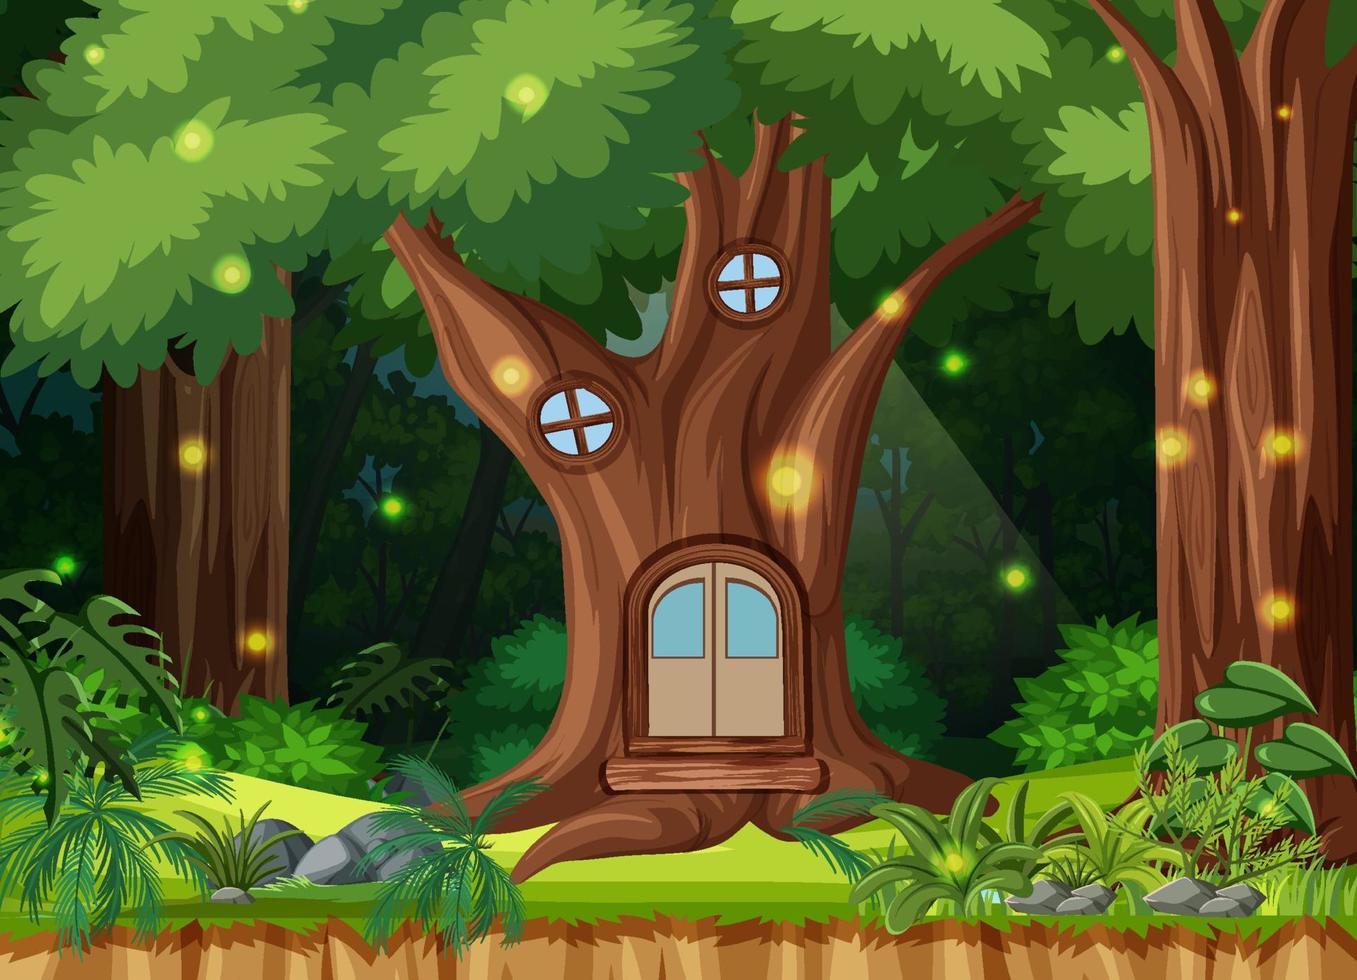 Enchanted forest background with tree house vector